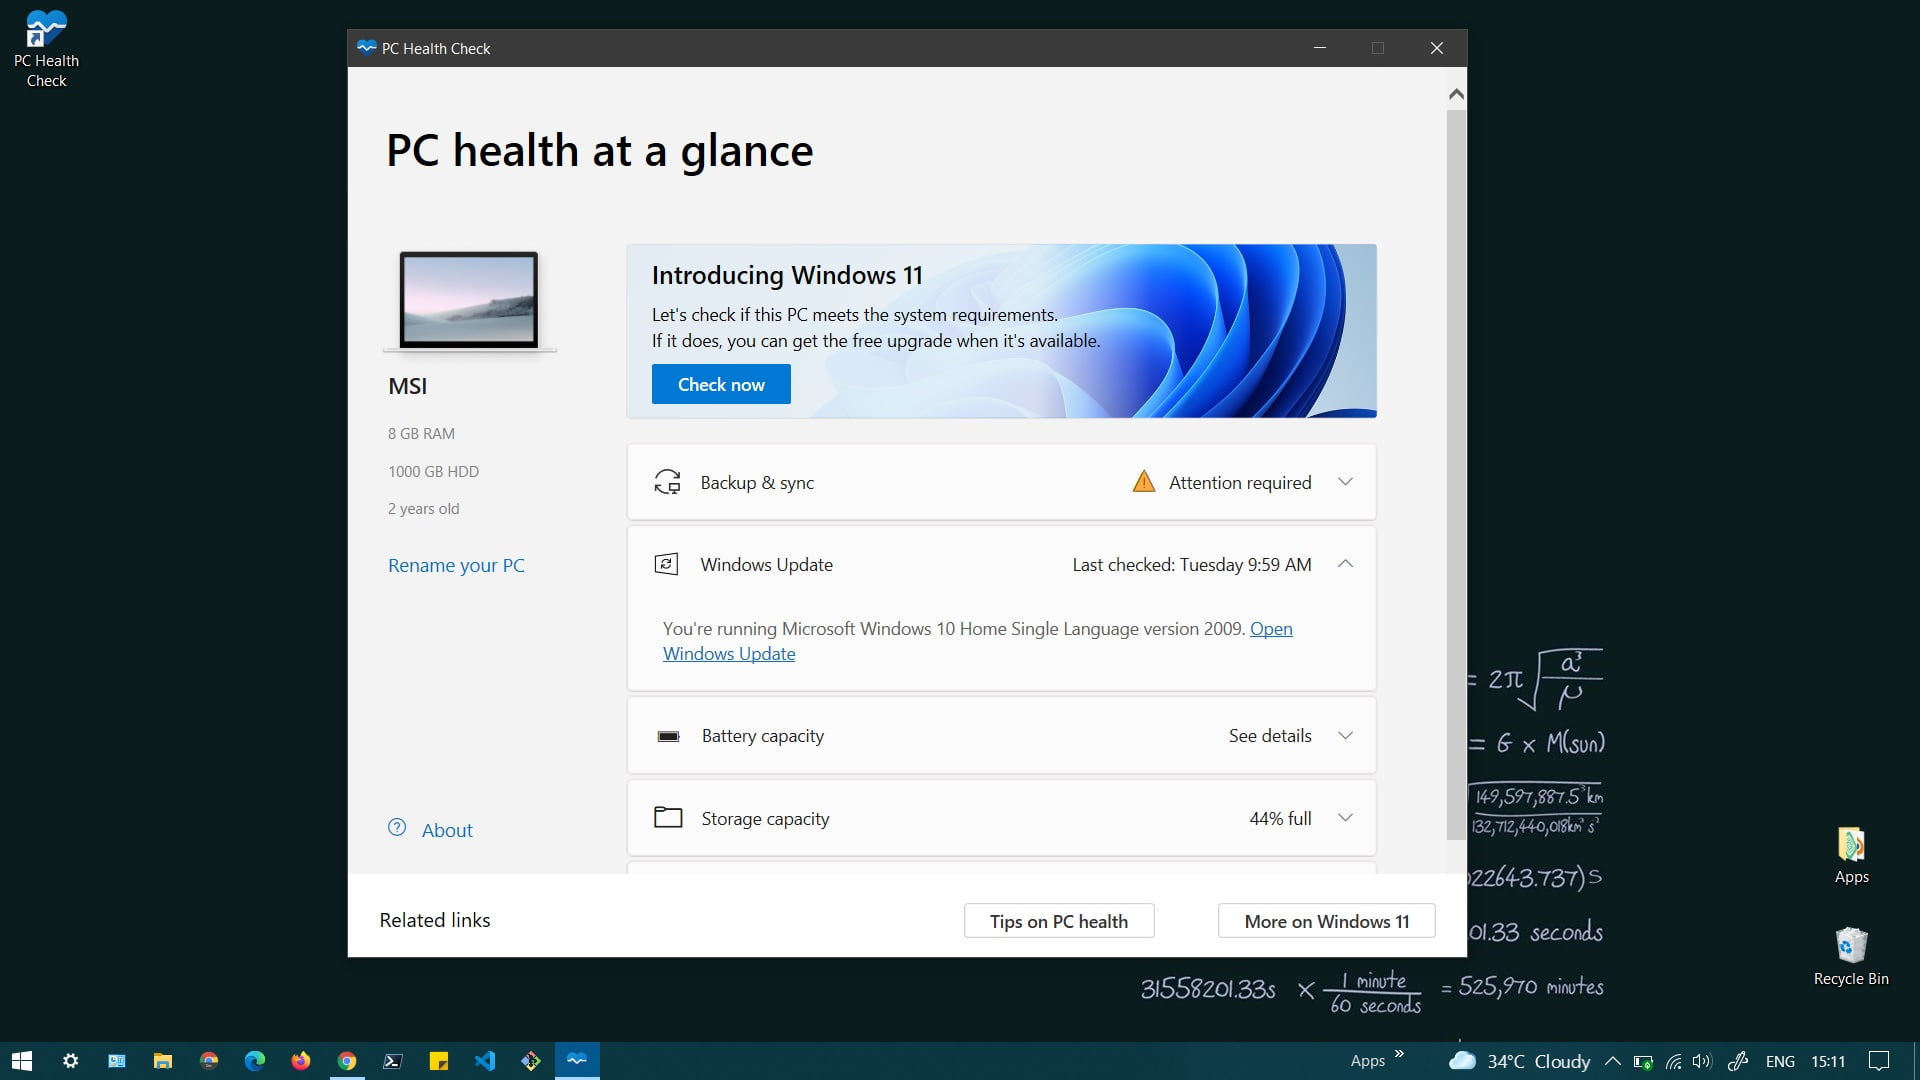 How to download pc health check app in windows 10